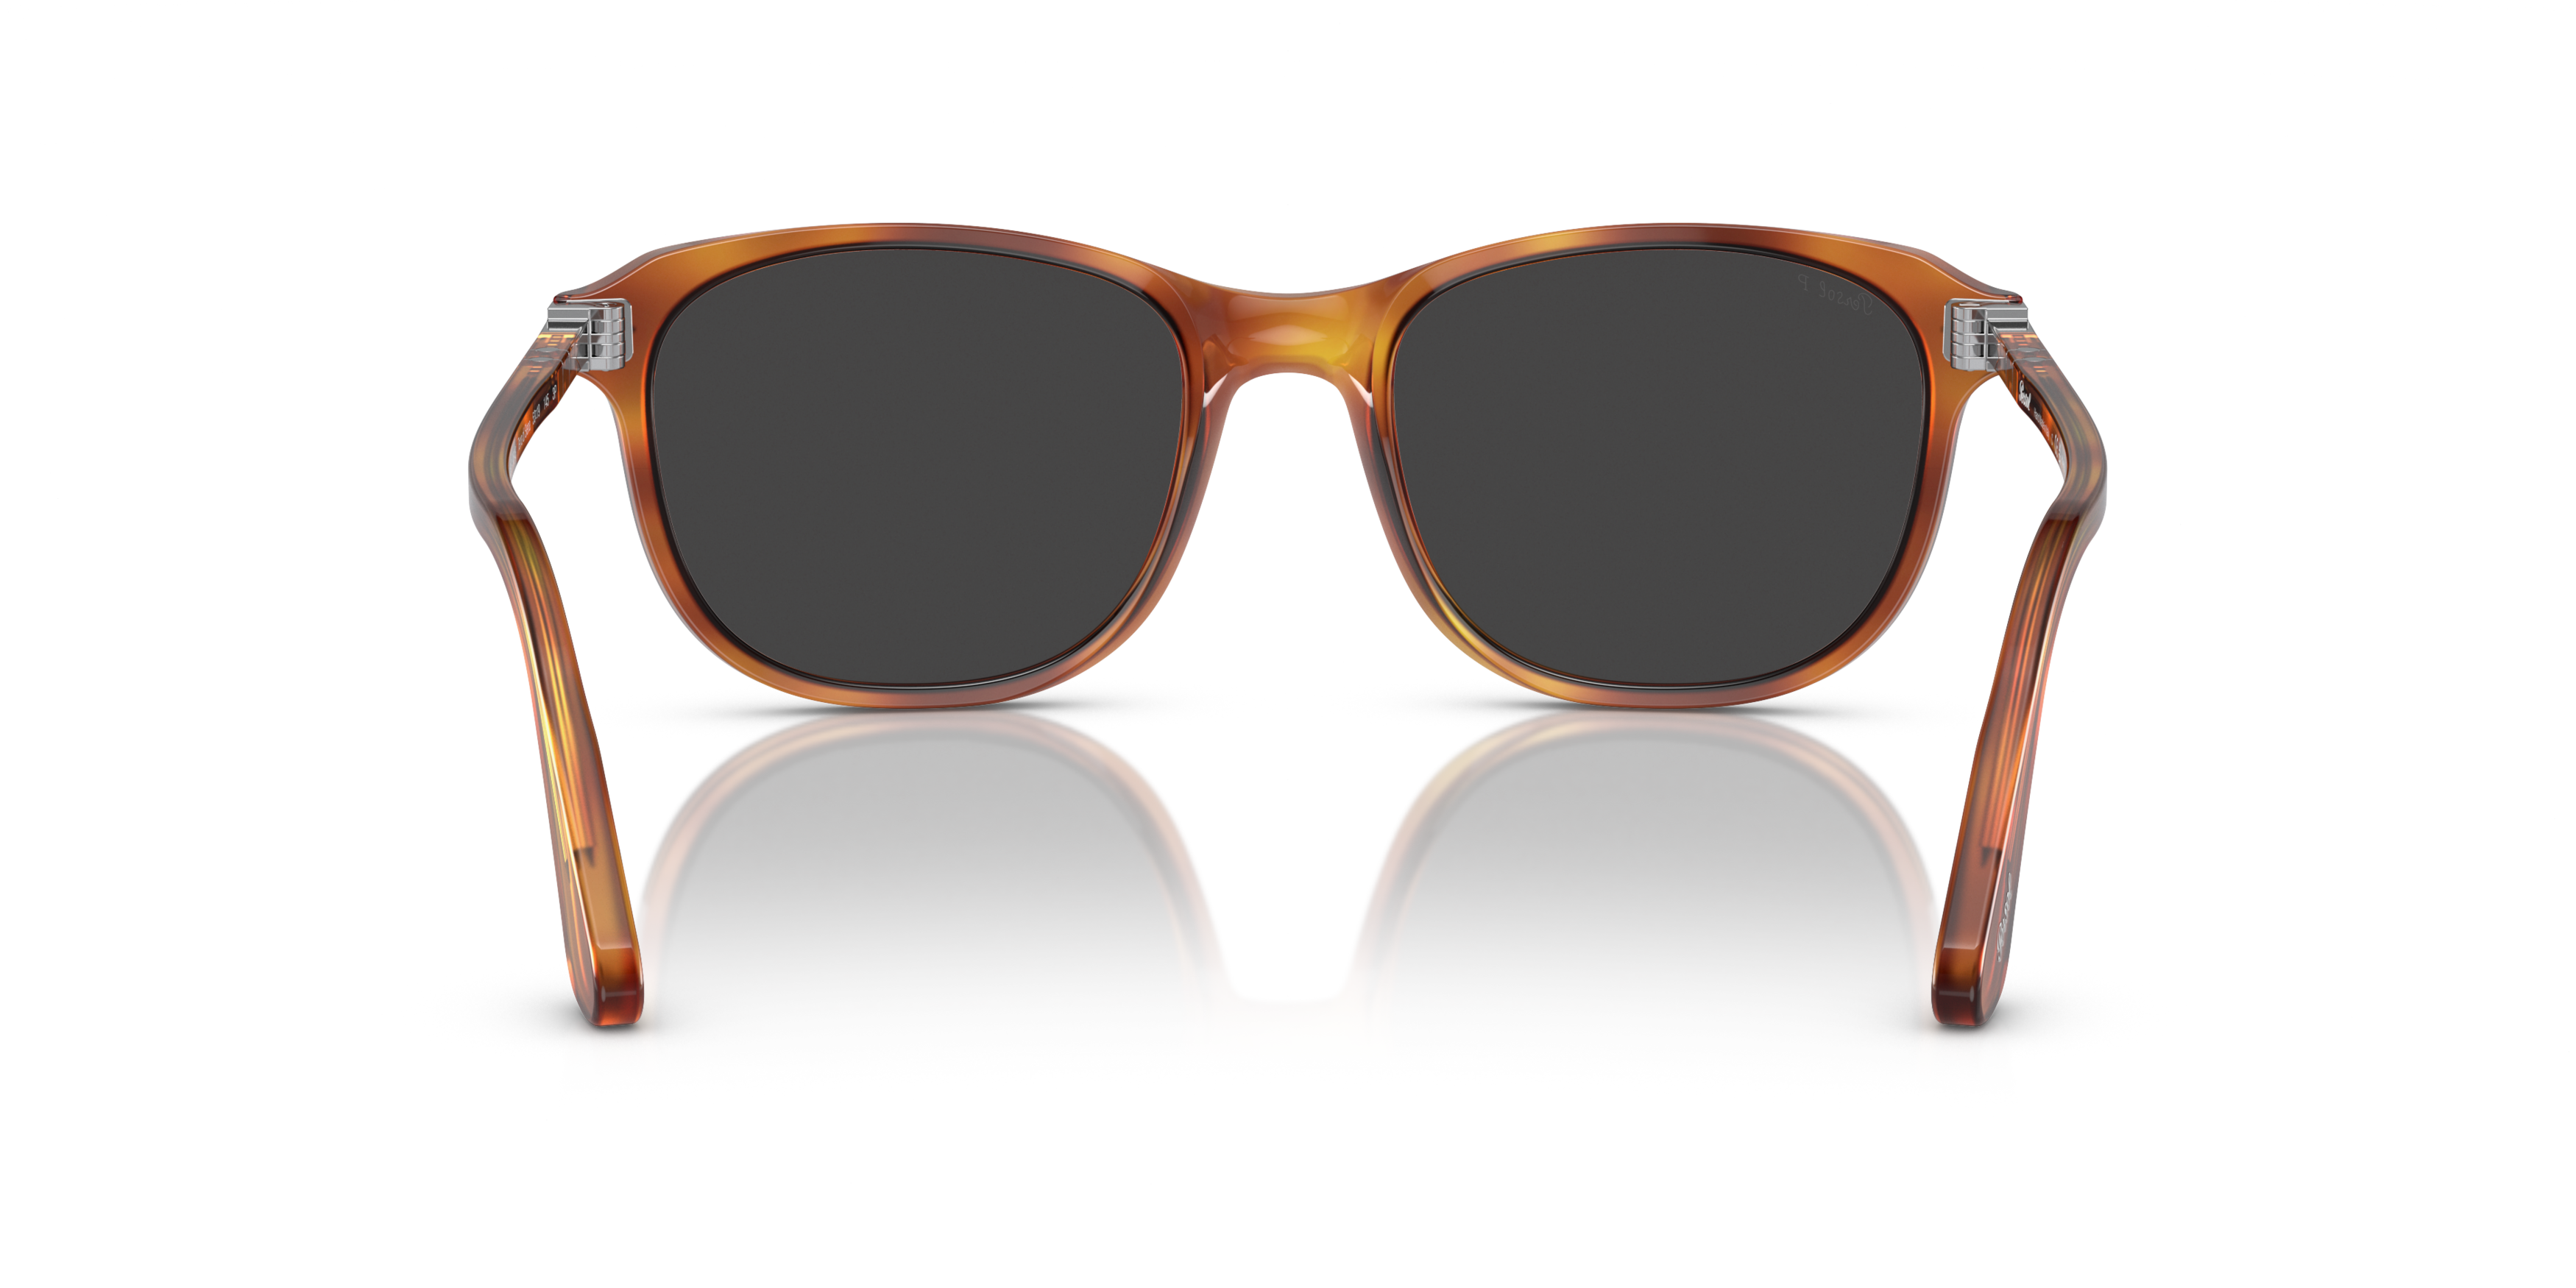 [products.image.detail02] Persol 0PO1935S 96/48